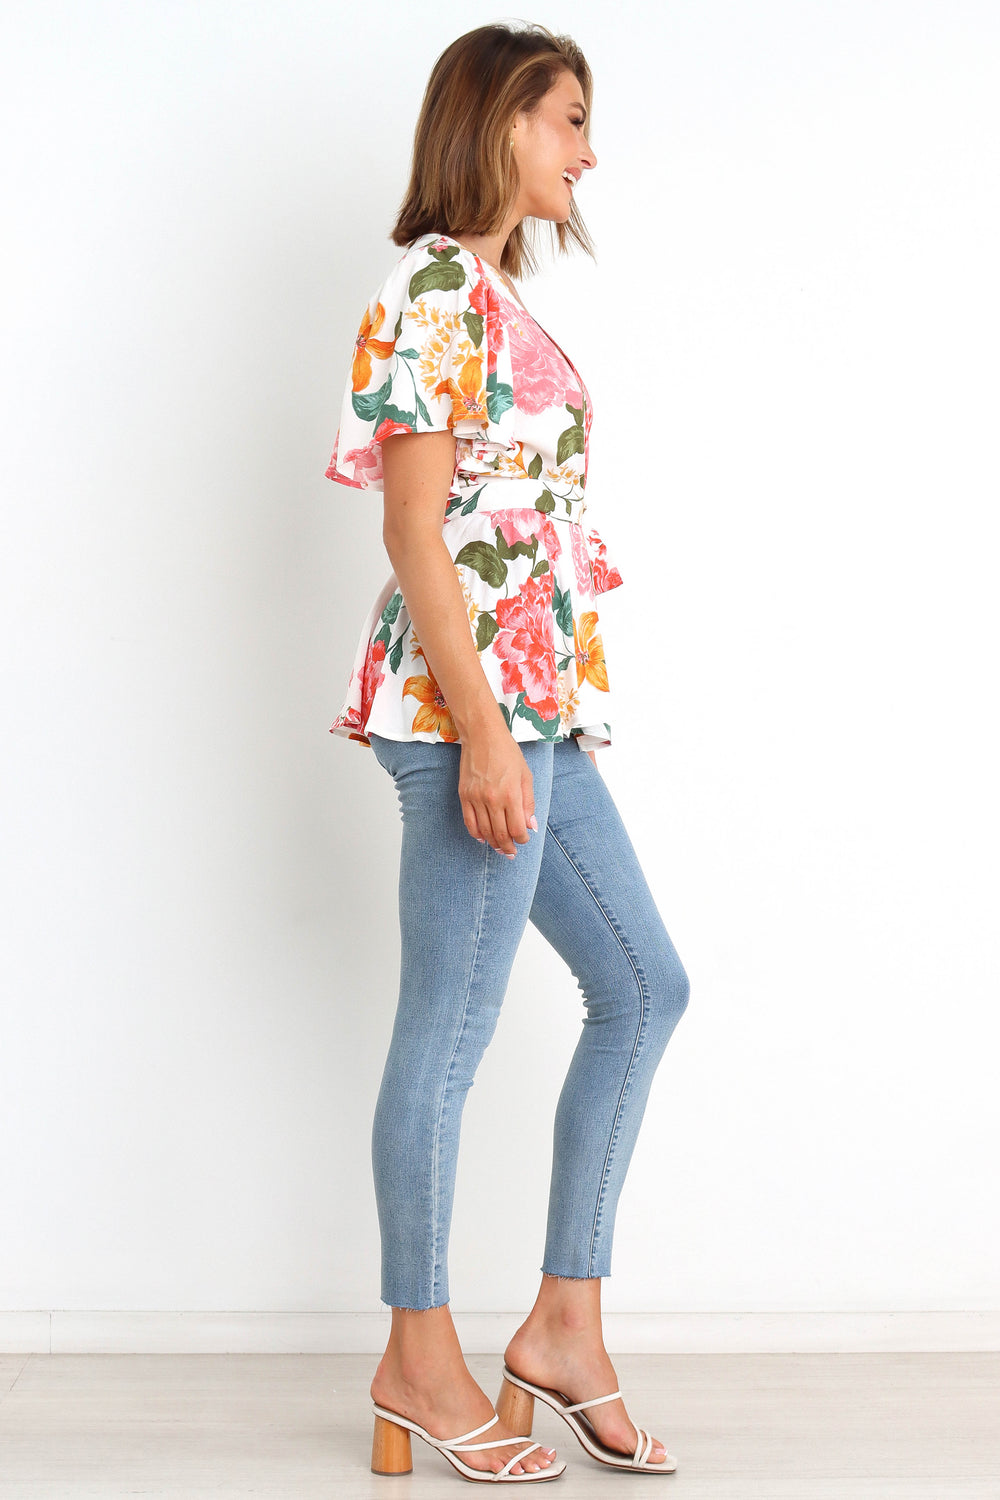 TOPS @Belle Top - White Floral